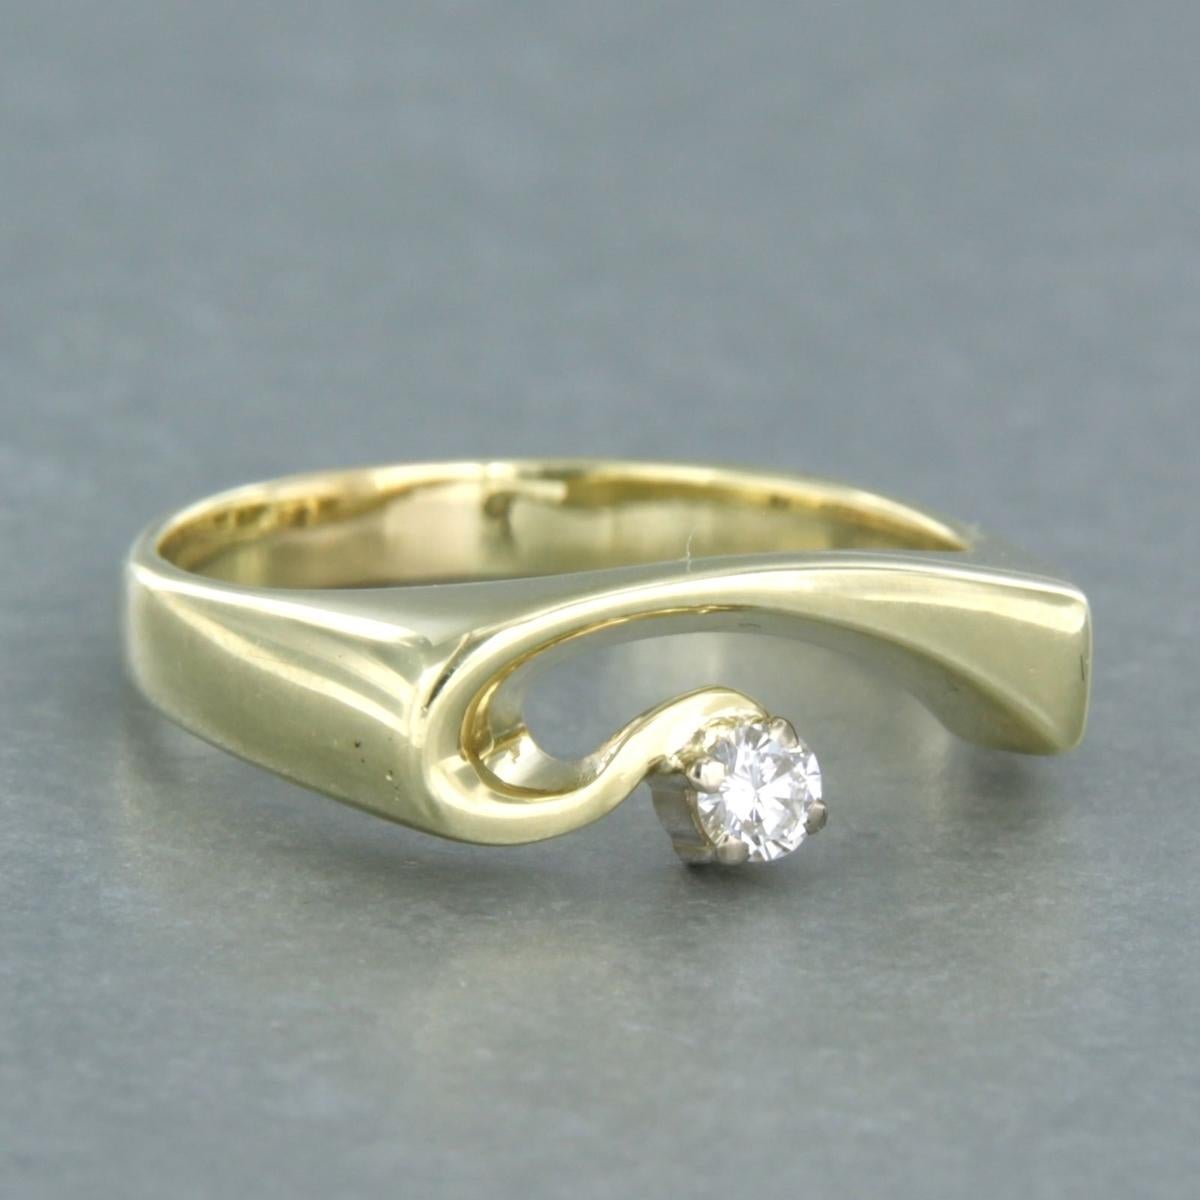 14k yellow gold ring set with one brilliant cut diamond 0.12 carat - Ringsize US 8.50

The head of the ring is 7.2 mm wide (0.3 inch)
Ring size : US 8.50 / EU 18.5 (58)
Weight : 5.2 gram (0.2 oz)

Set with 

- 1 x 3.2 mm brilliant cut diamond, circa